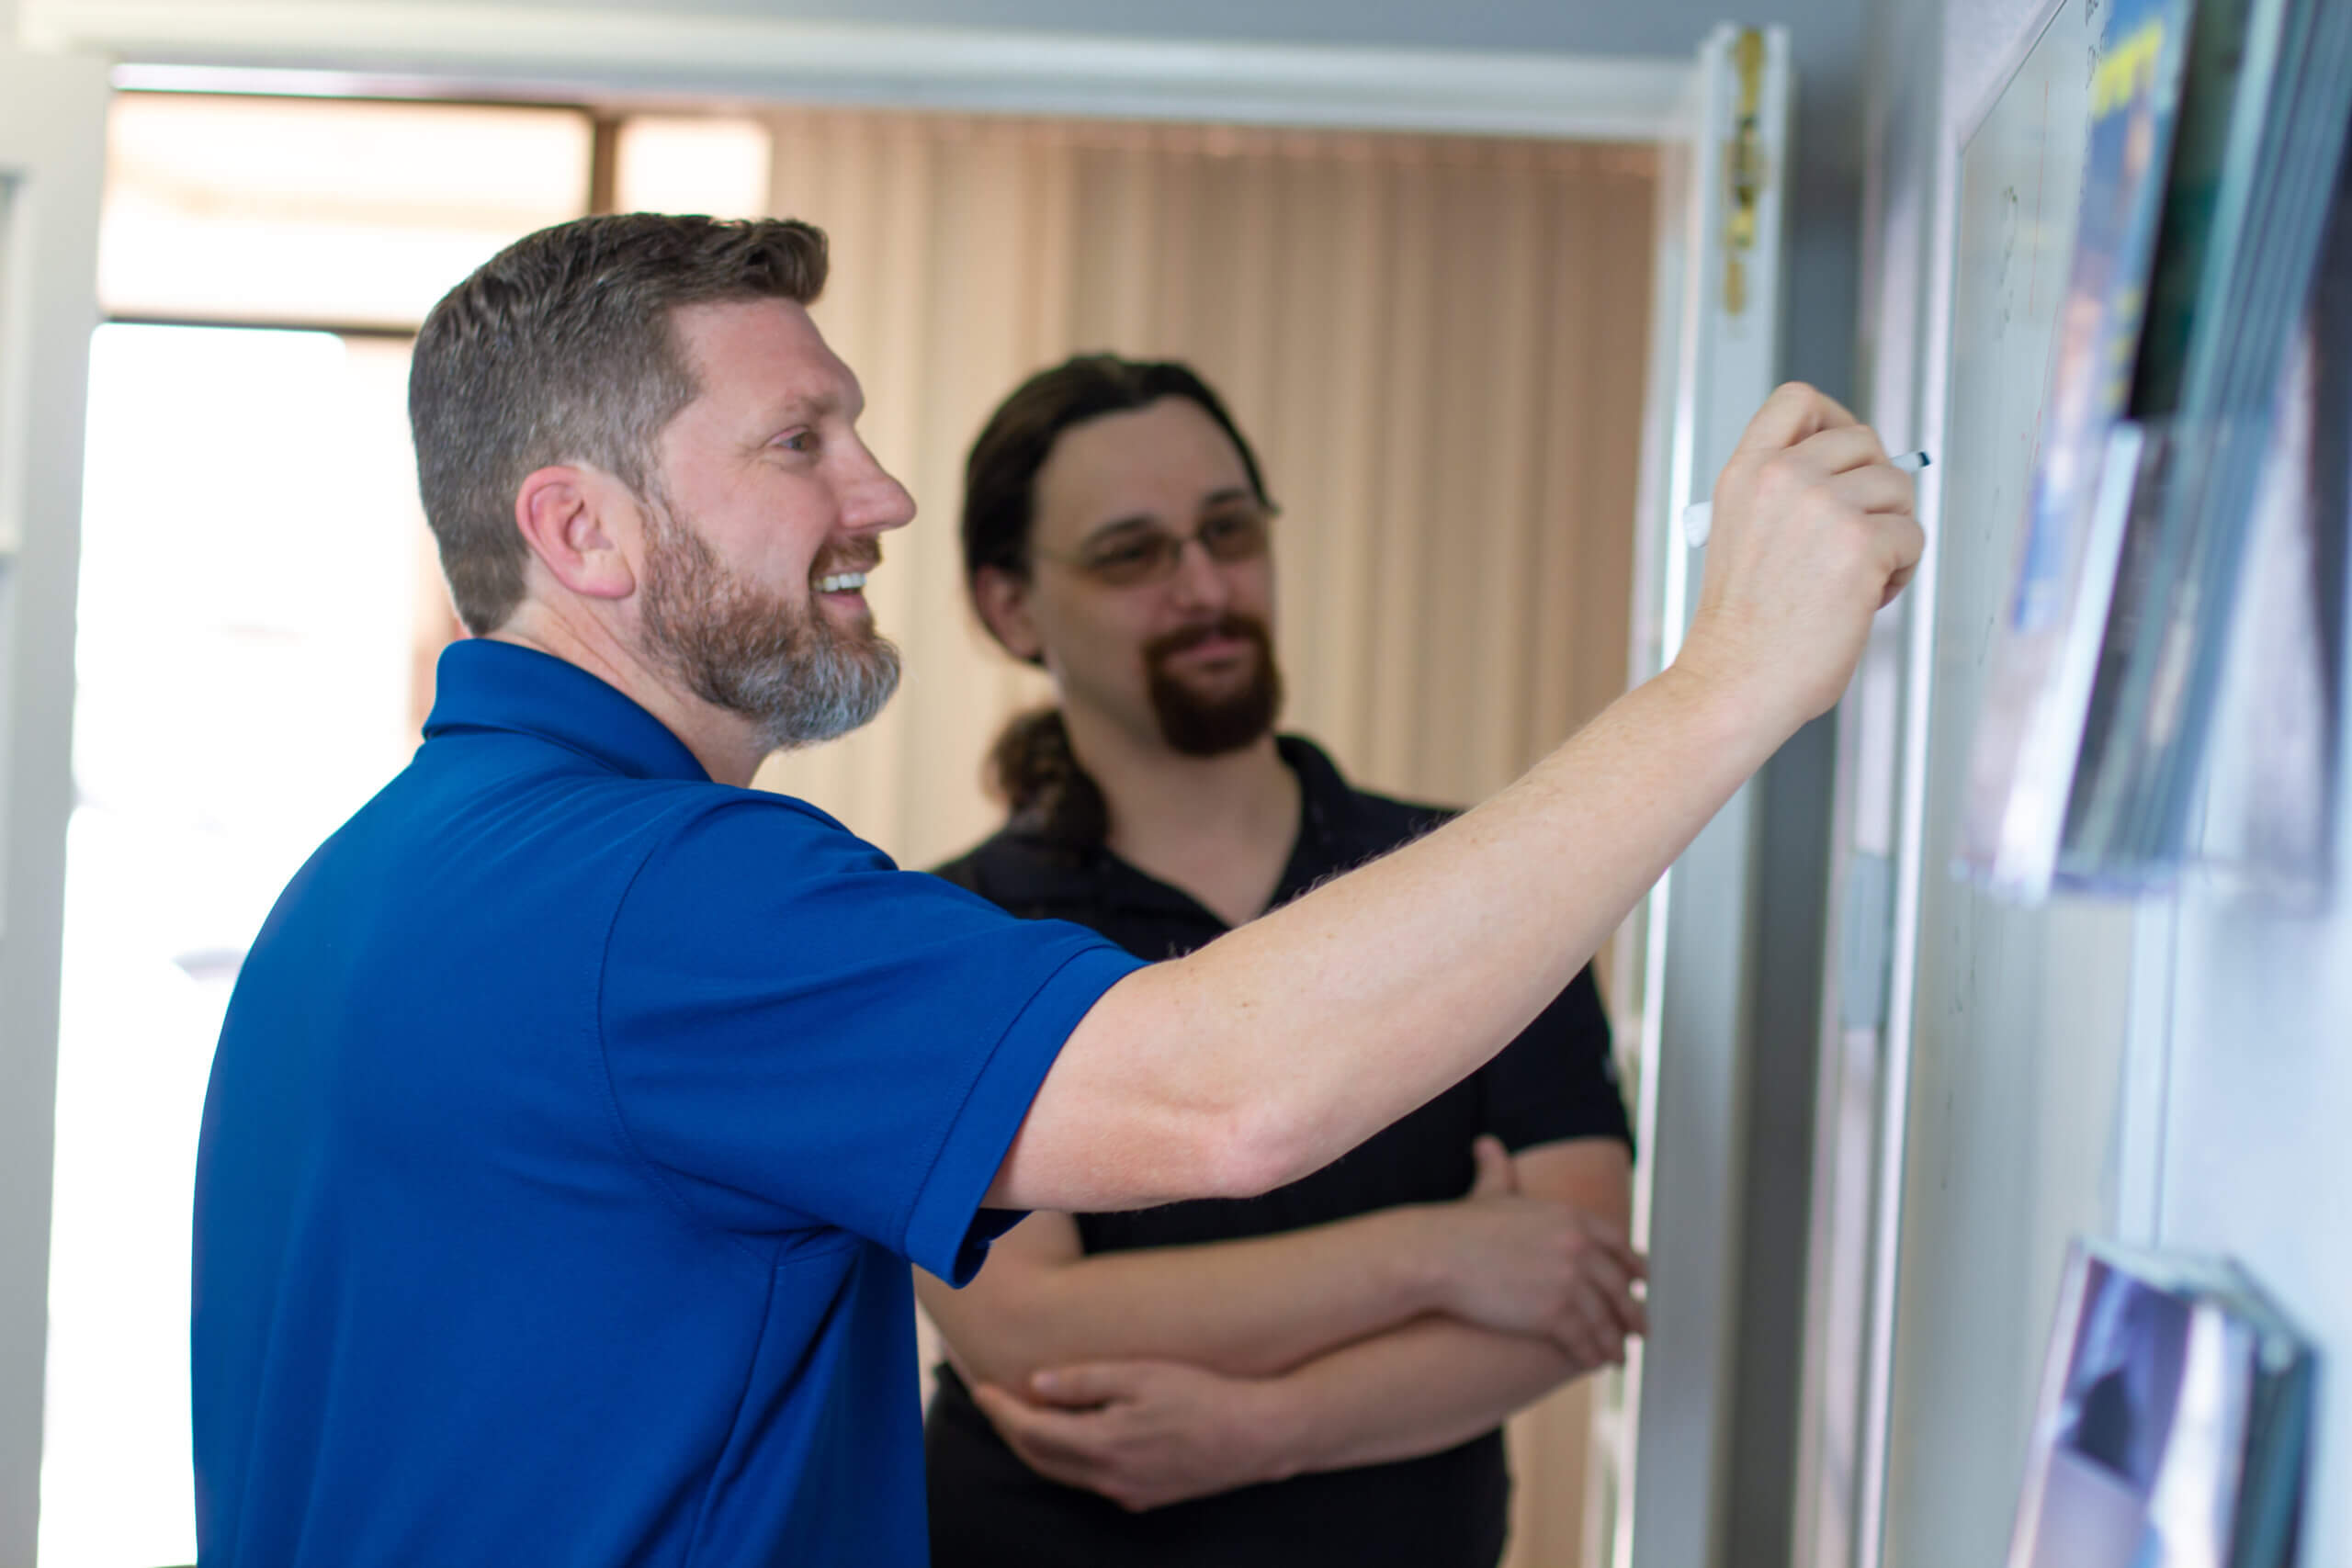 IT Professionals Strategizing Managed IT Services On Whiteboard